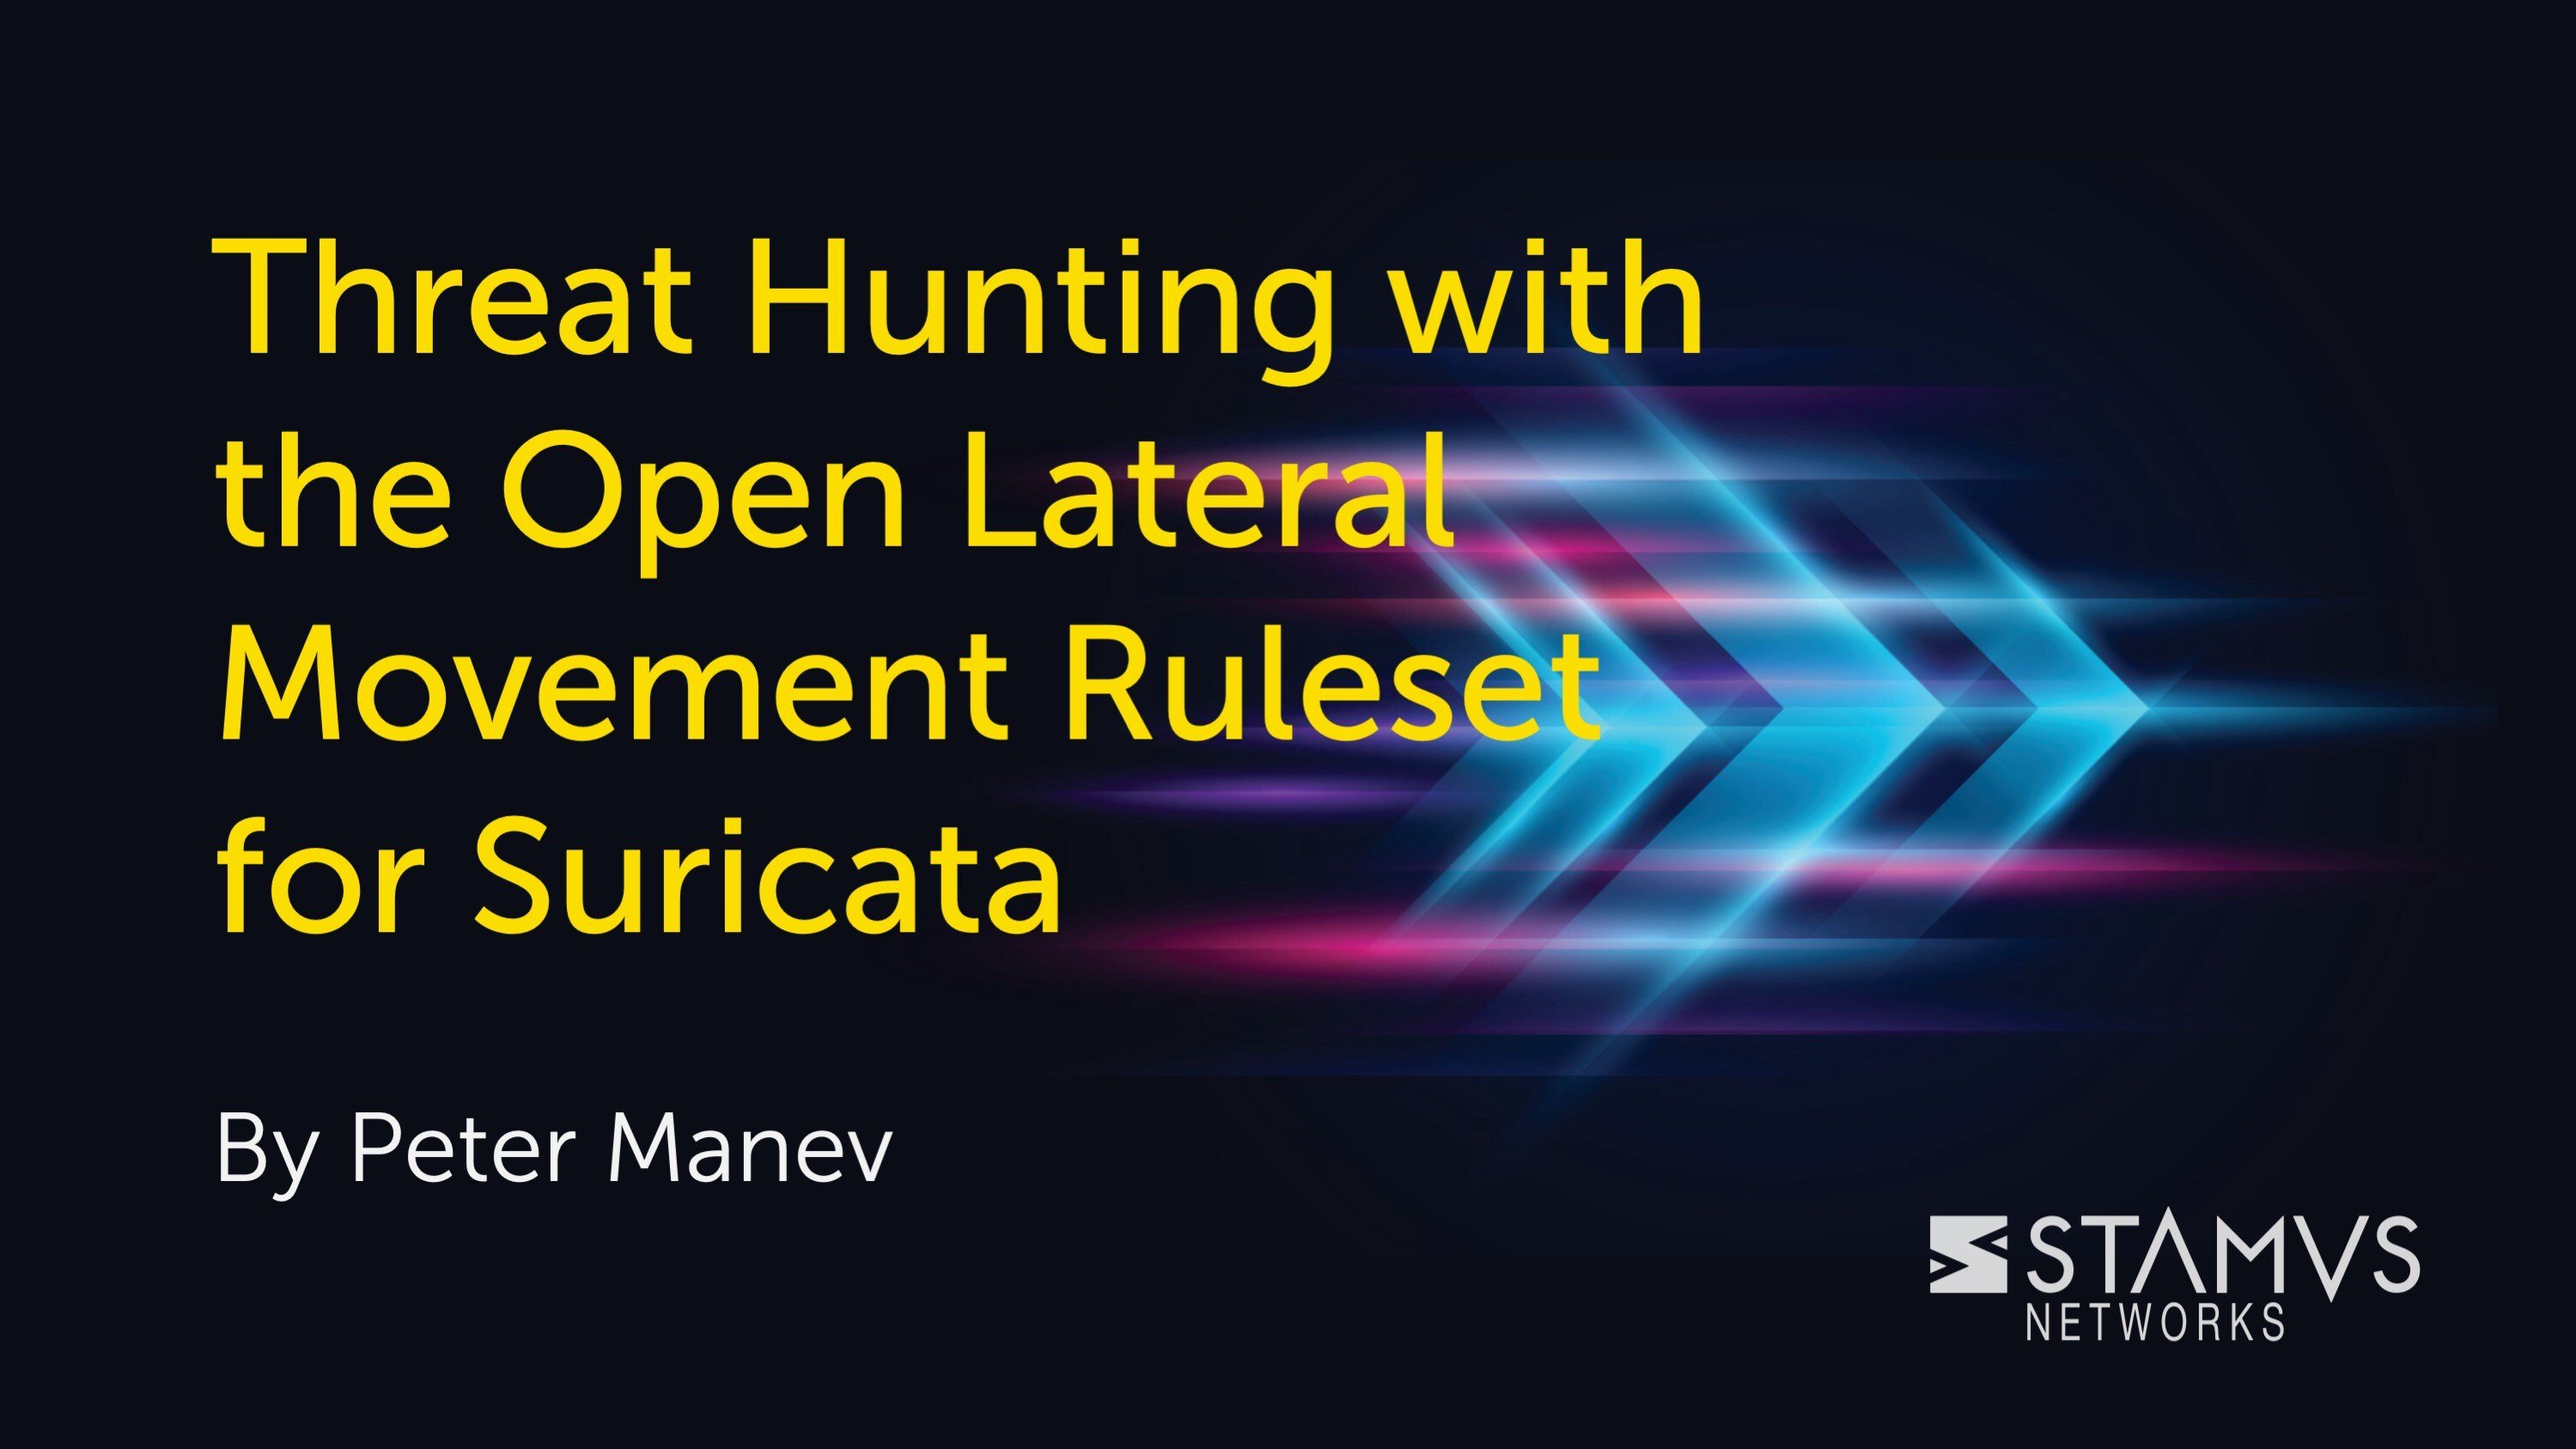 Threat Hunting with the Open Lateral Movement Ruleset for Suricata by Peter Manev